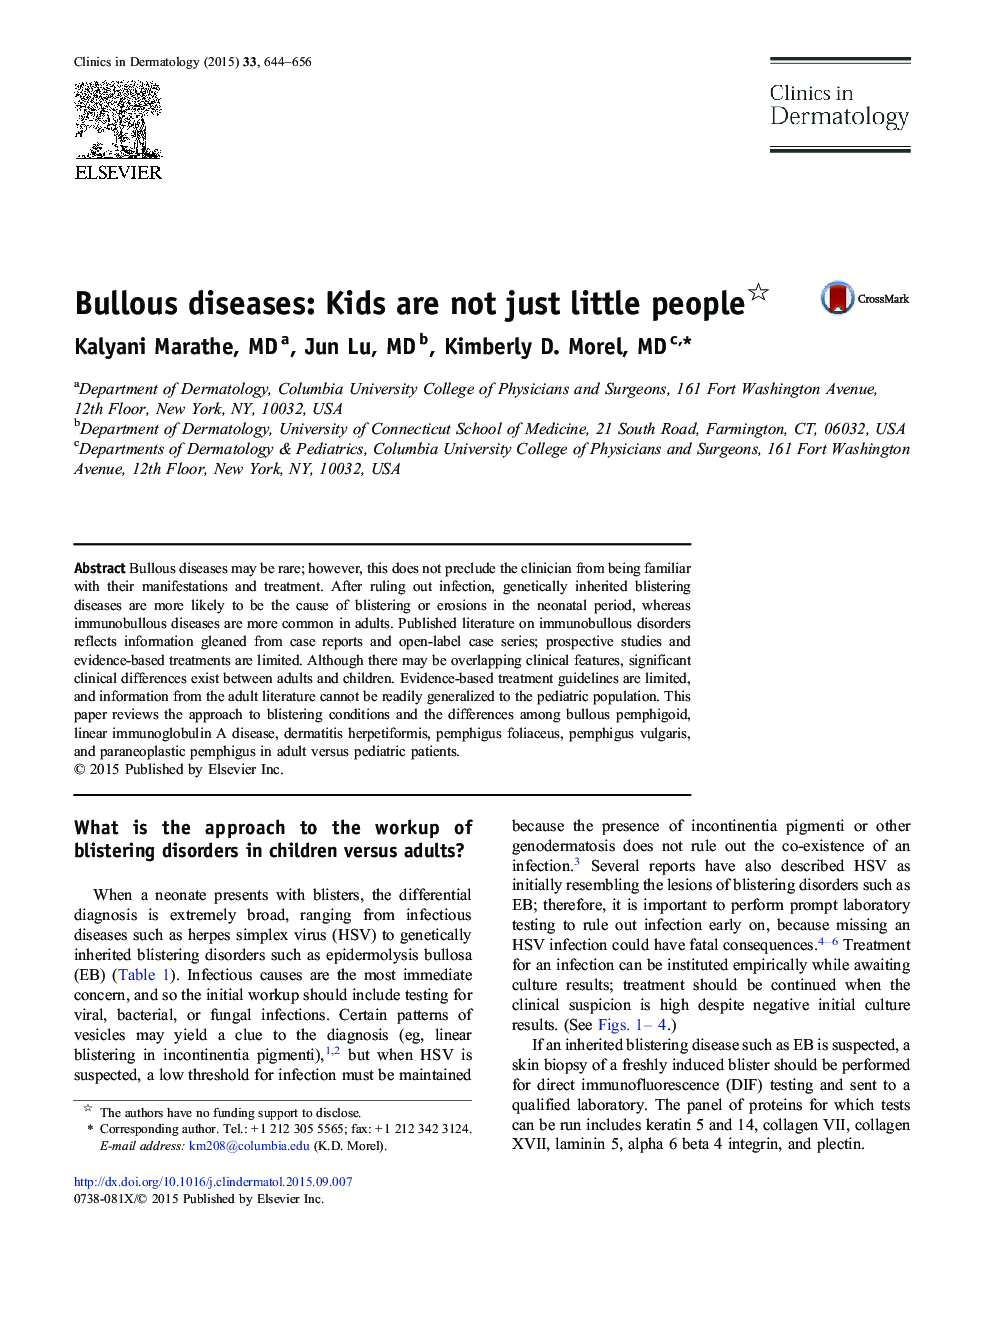 Bullous diseases: Kids are not just little people 